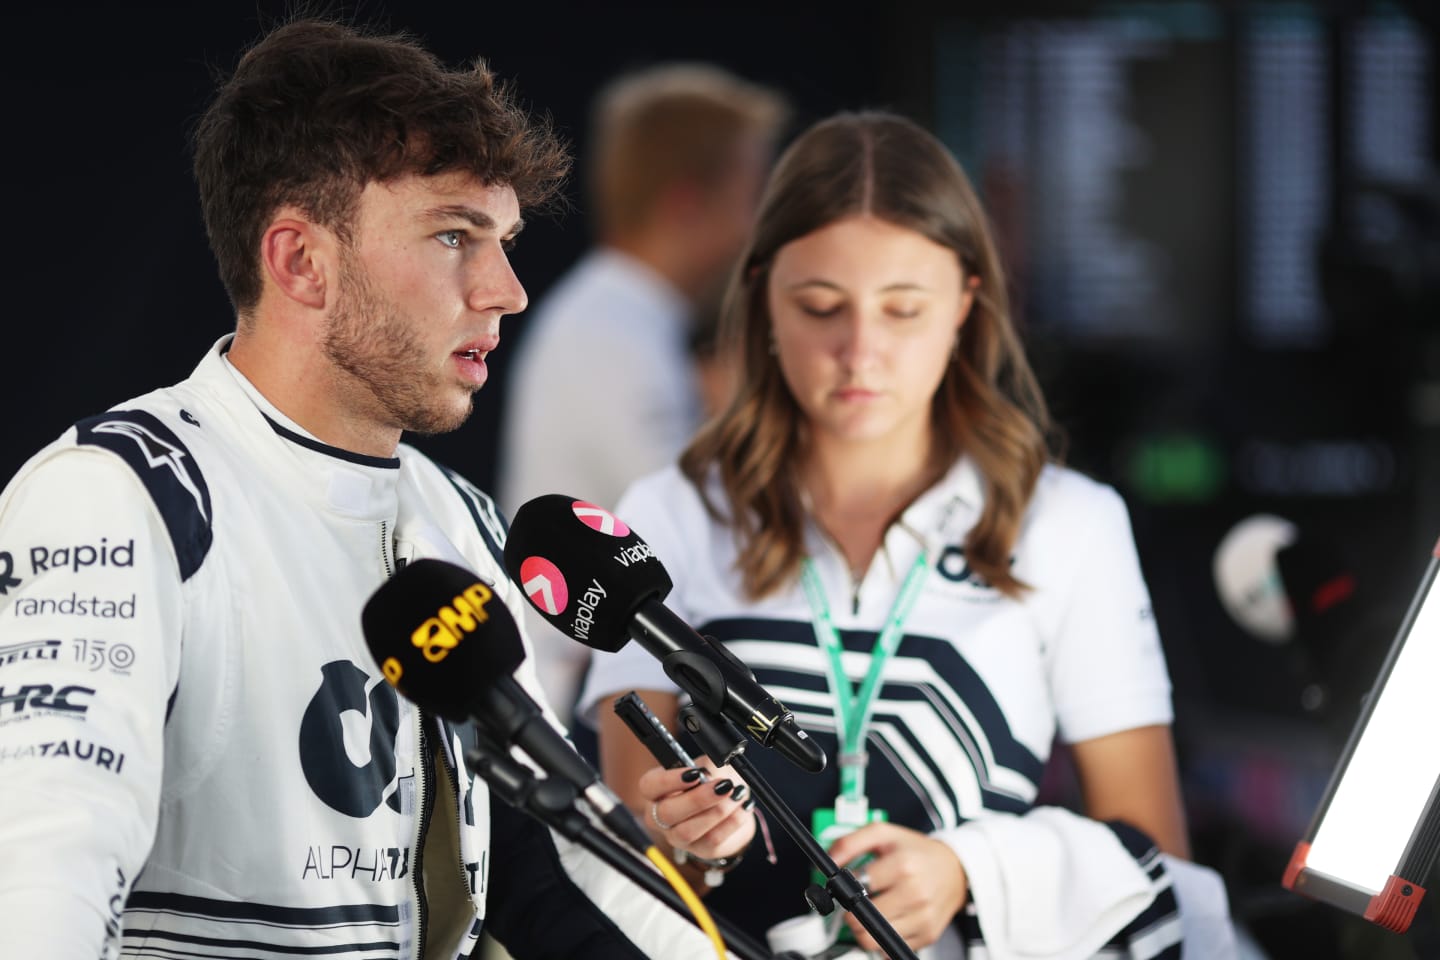 AUSTIN, TEXAS - OCTOBER 22: Thirteenth placed qualifier Pierre Gasly of France and Scuderia AlphaTauri talks to the media in the Paddock during qualifying ahead of the F1 Grand Prix of USA at Circuit of The Americas on October 22, 2022 in Austin, Texas. (Photo by Peter Fox/Getty Images)